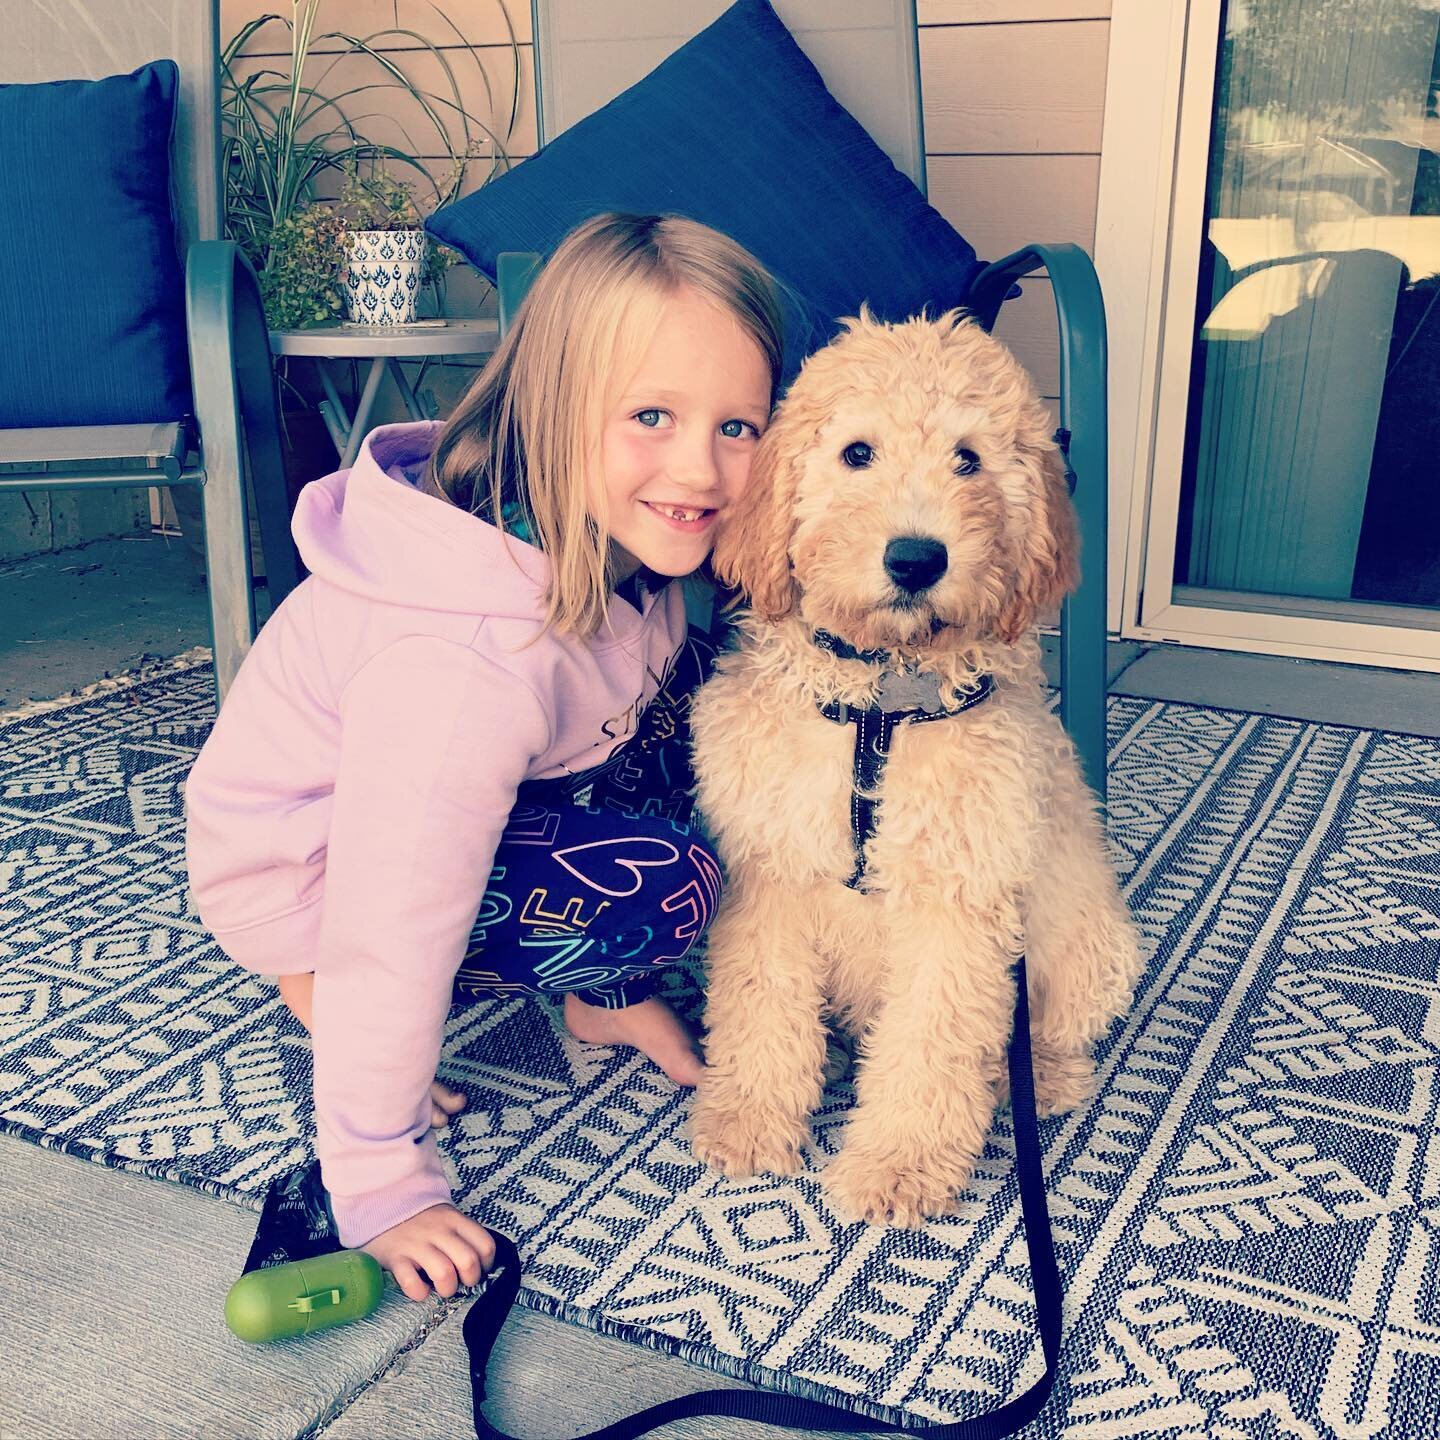 A girl and her dog! I can&rsquo;t even handle the cuteness!
😍
...I mean, admittedly, we&rsquo;re all really looking forward to him going to puppy training next month 🤣, but we love him so much! There&rsquo;s a lot to learn as a new dog mom (I REALL